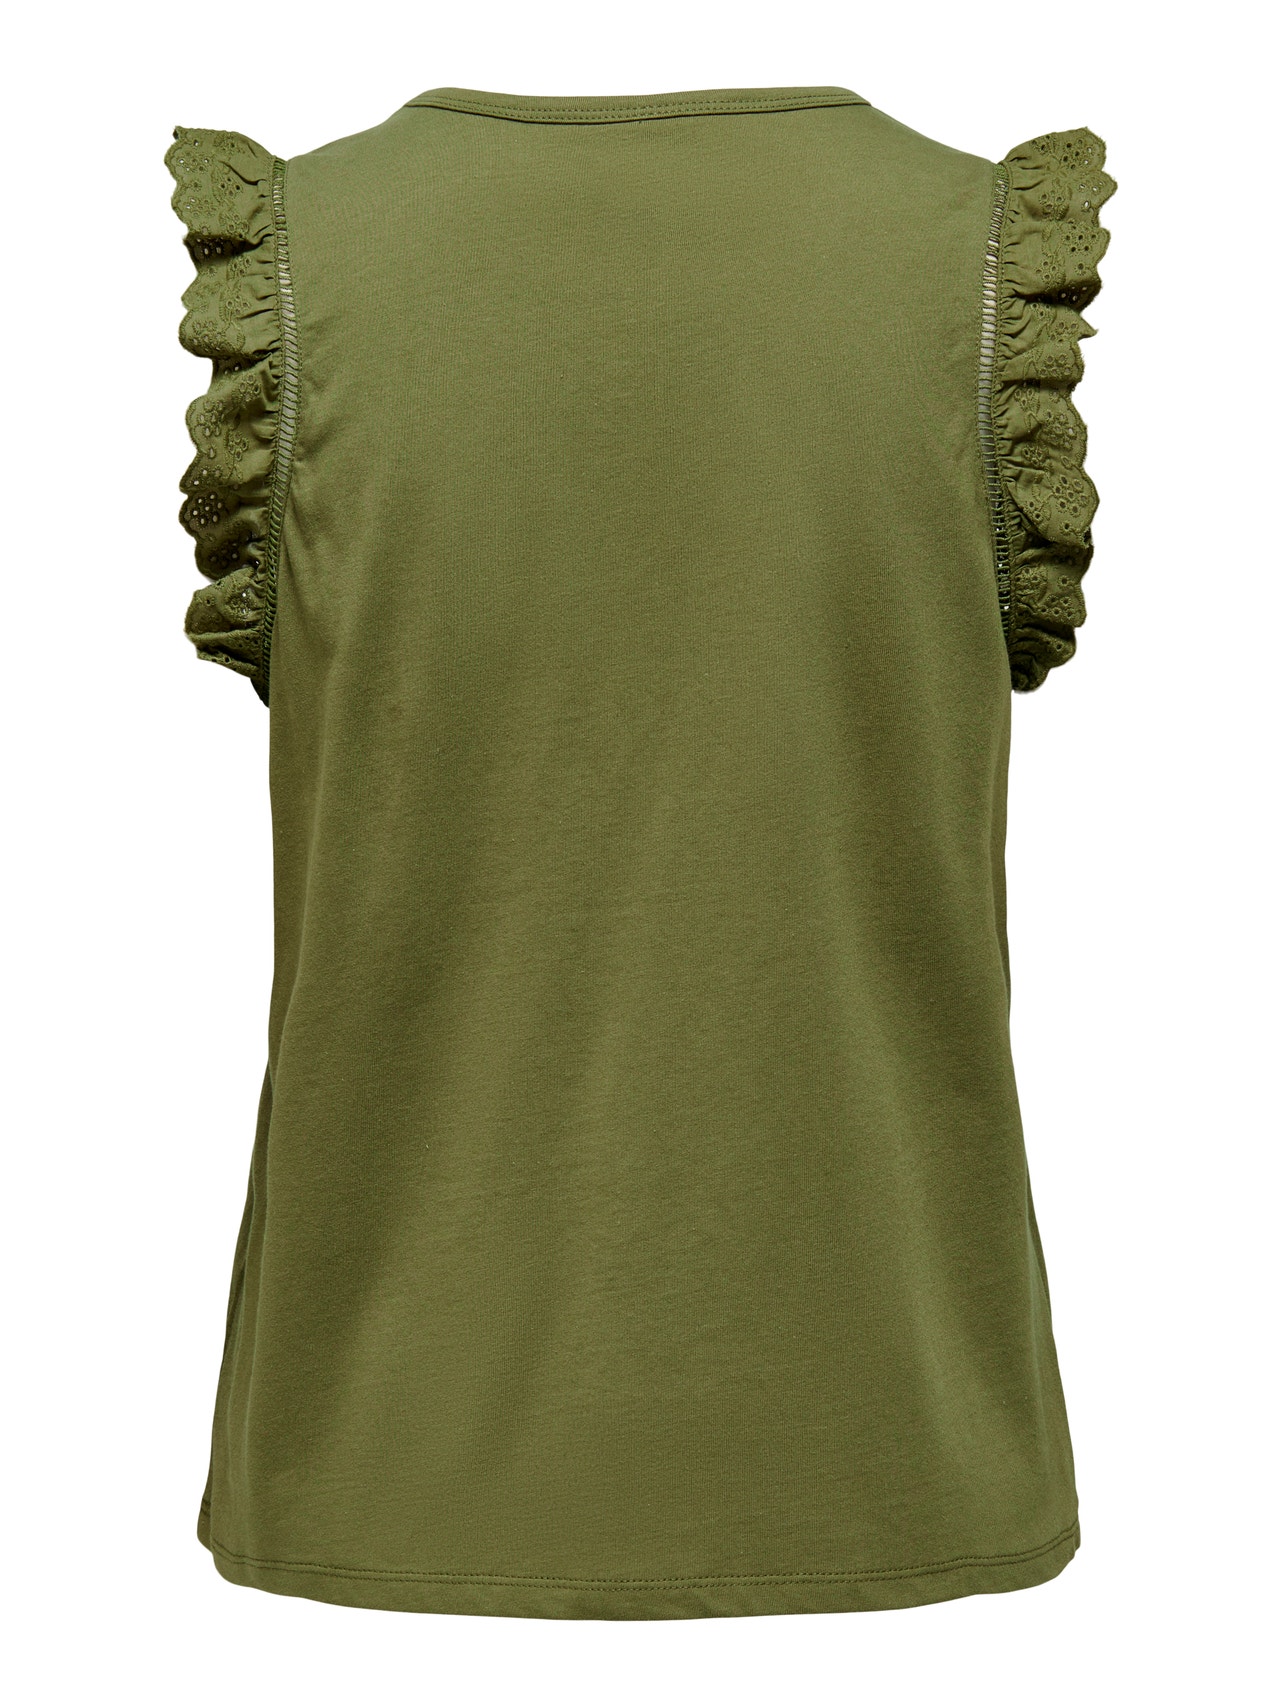 ONLY Top With Ruffle Sleeves -Martini Olive - 15289579